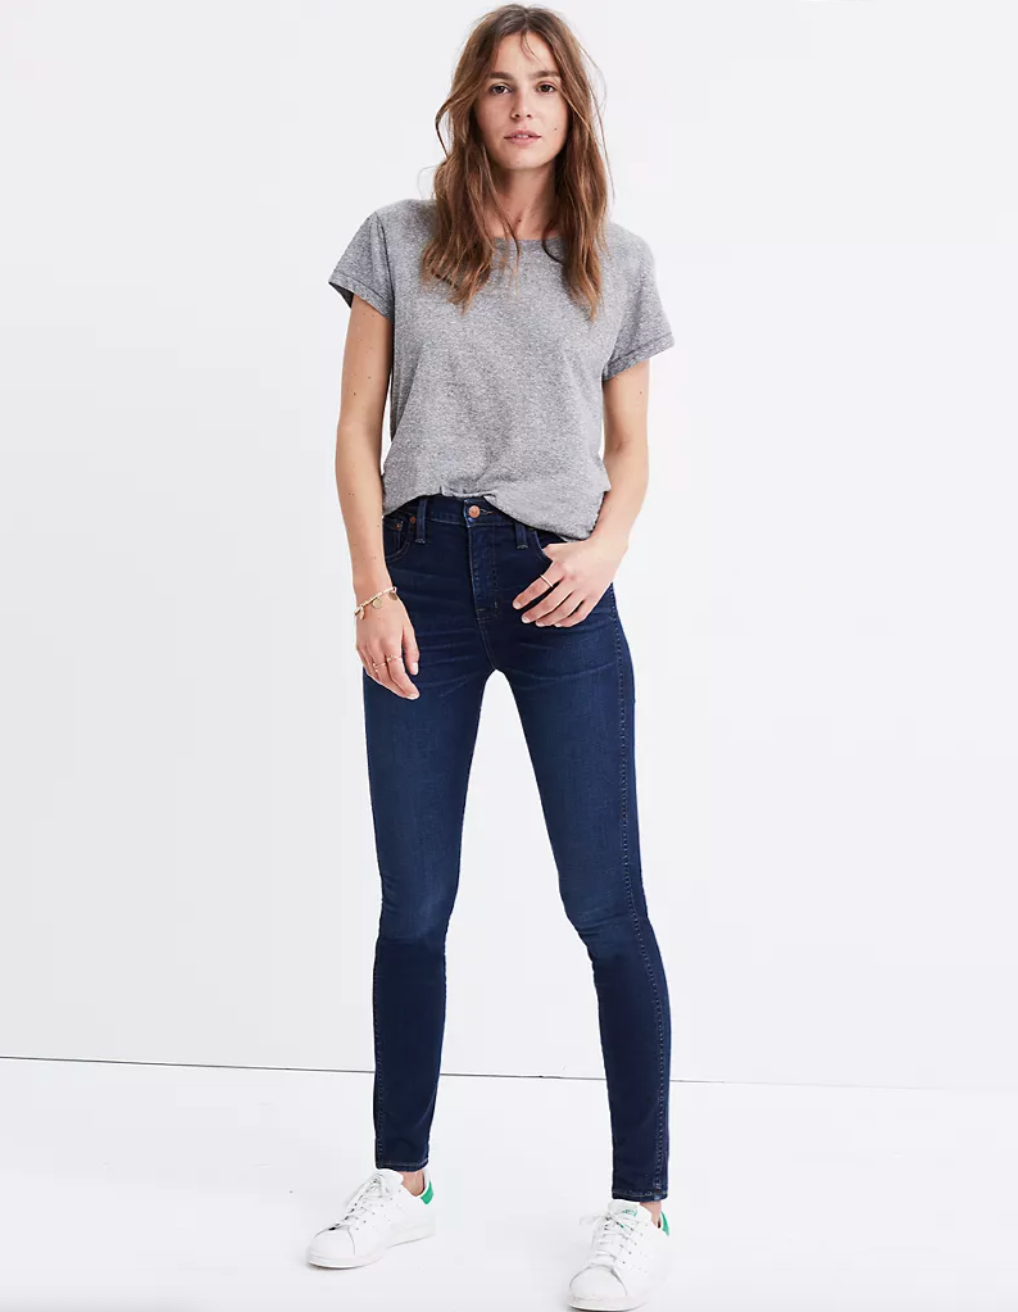 Every Pair Of Jeans At Madewell Are $75 Right Now - CTS Store